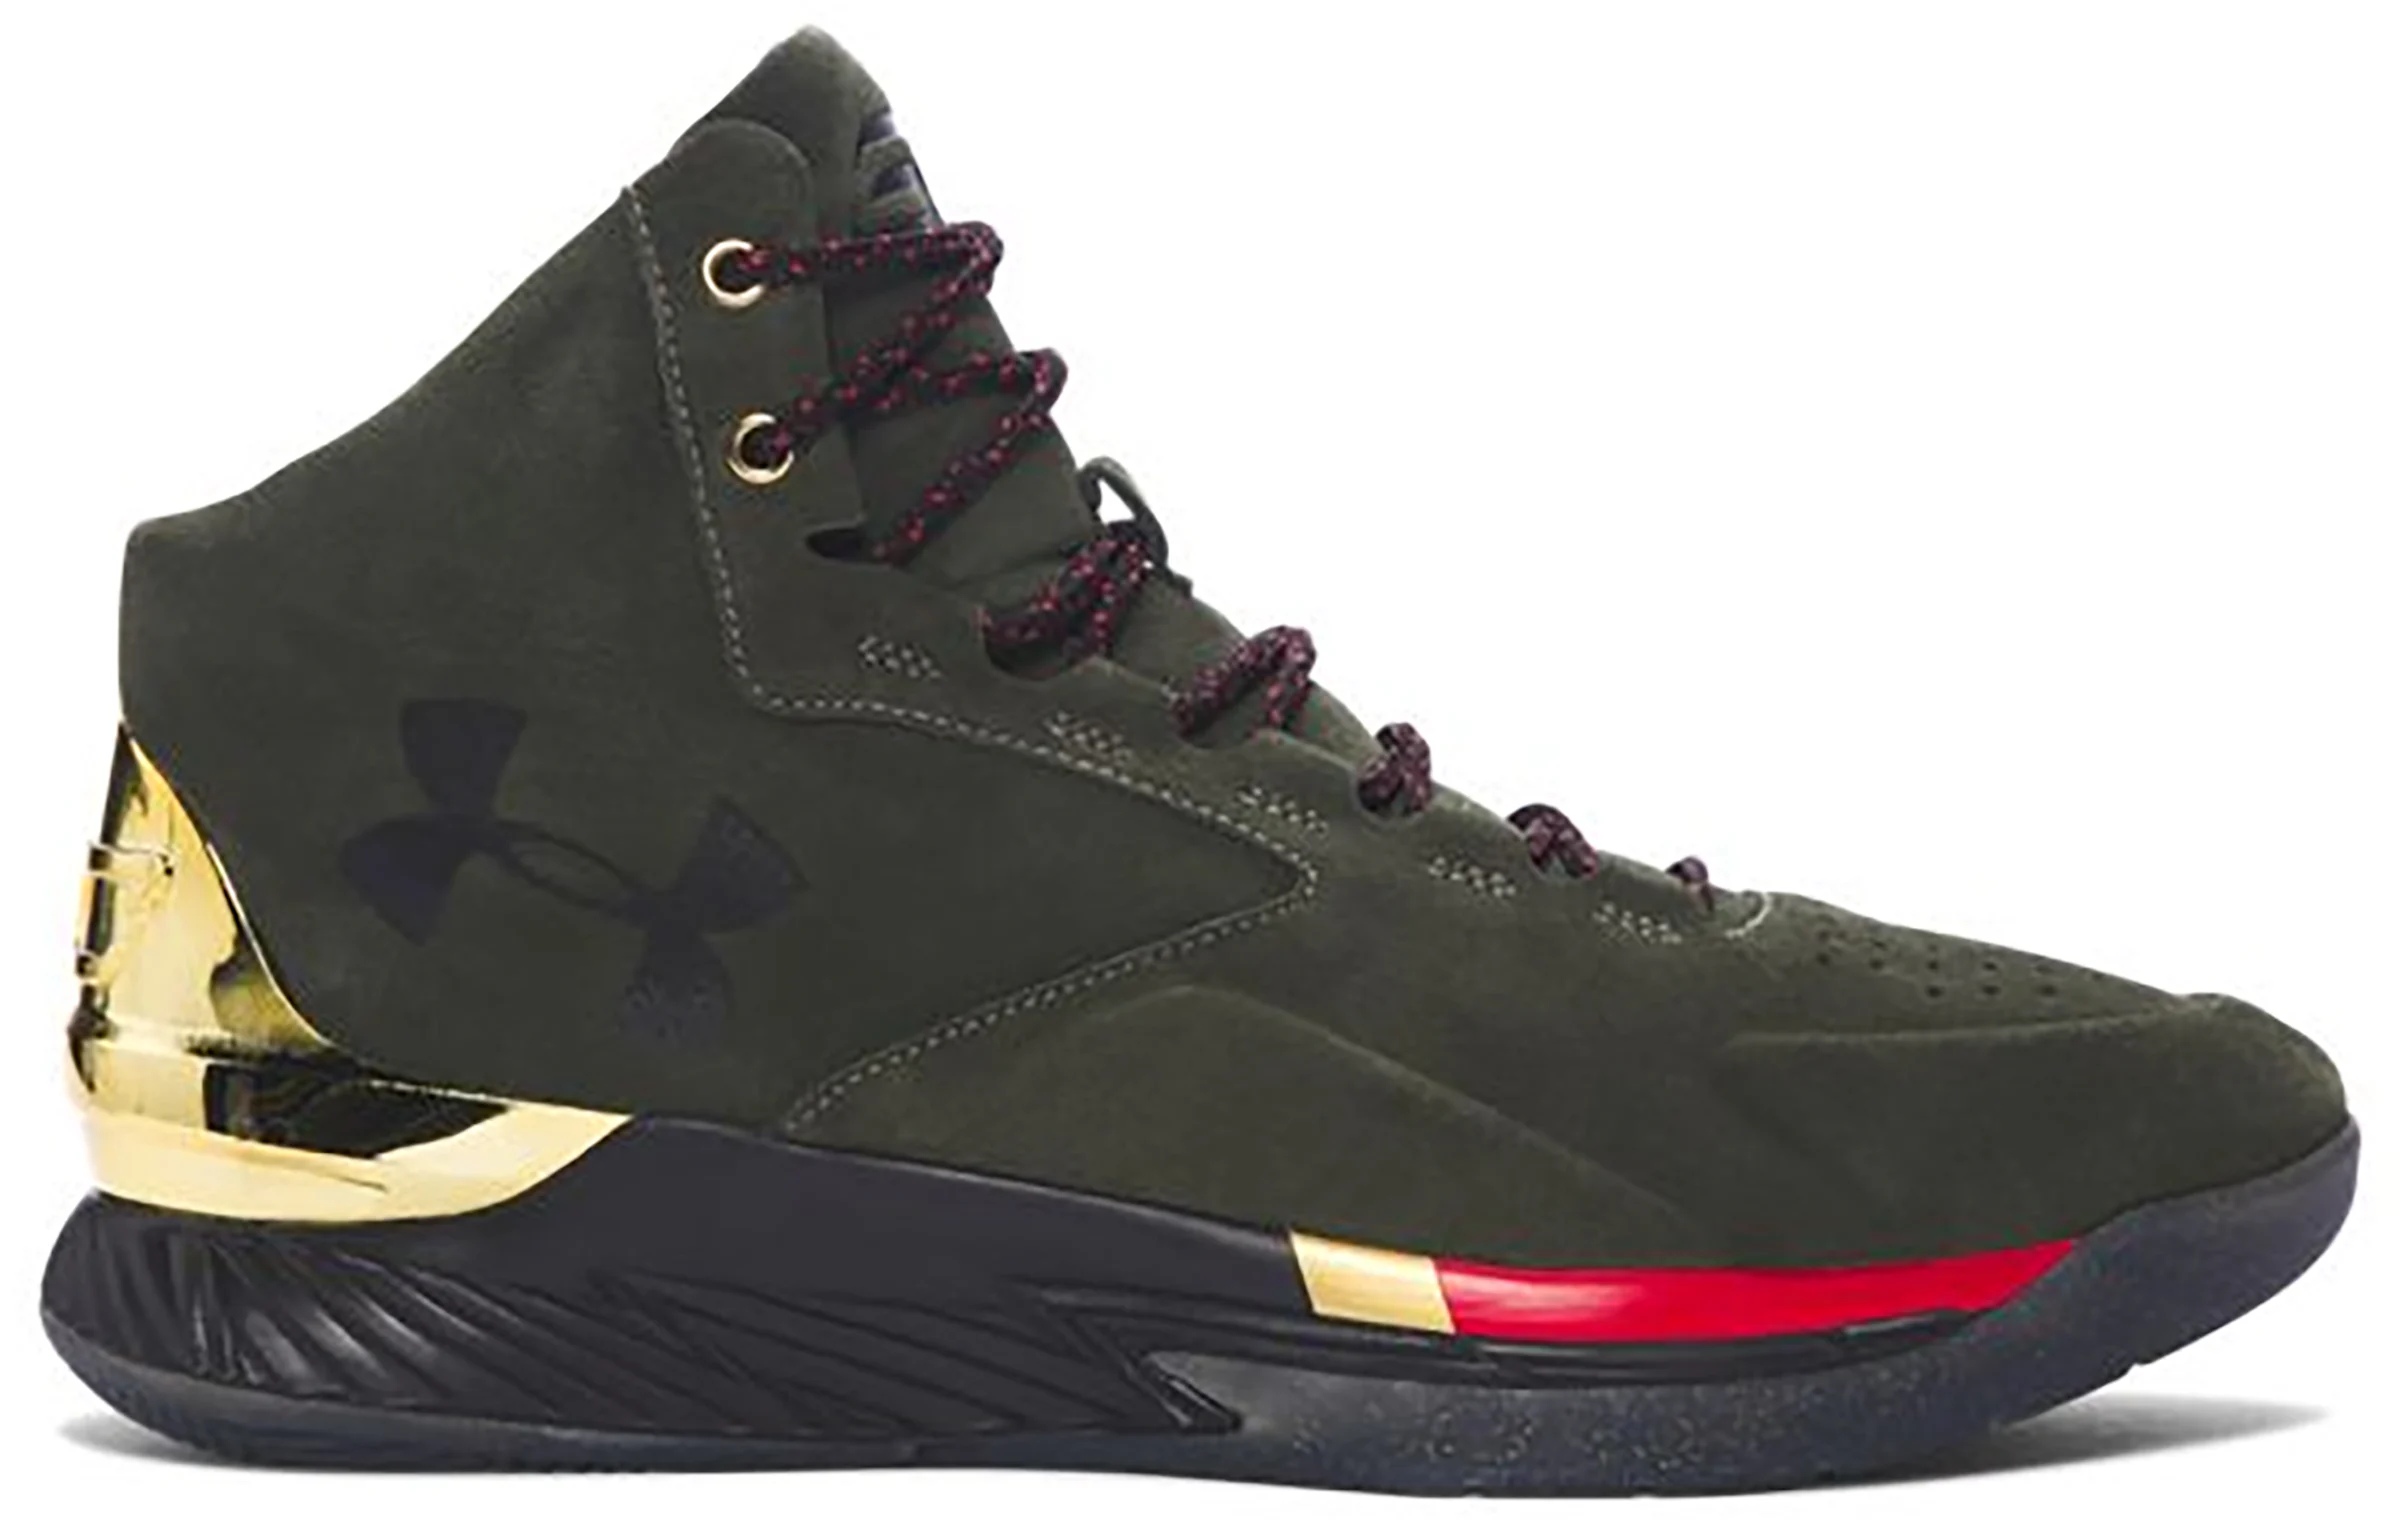 https://images.stockx.com/images/Under-Armour-Curry-1-Lux-Mid-Suede-Downtown-Green.png?fit=fill&bg=FFFFFF&w=1200&h=857&fm=webp&auto=compress&dpr=2&trim=color&updated_at=1627415622&q=60